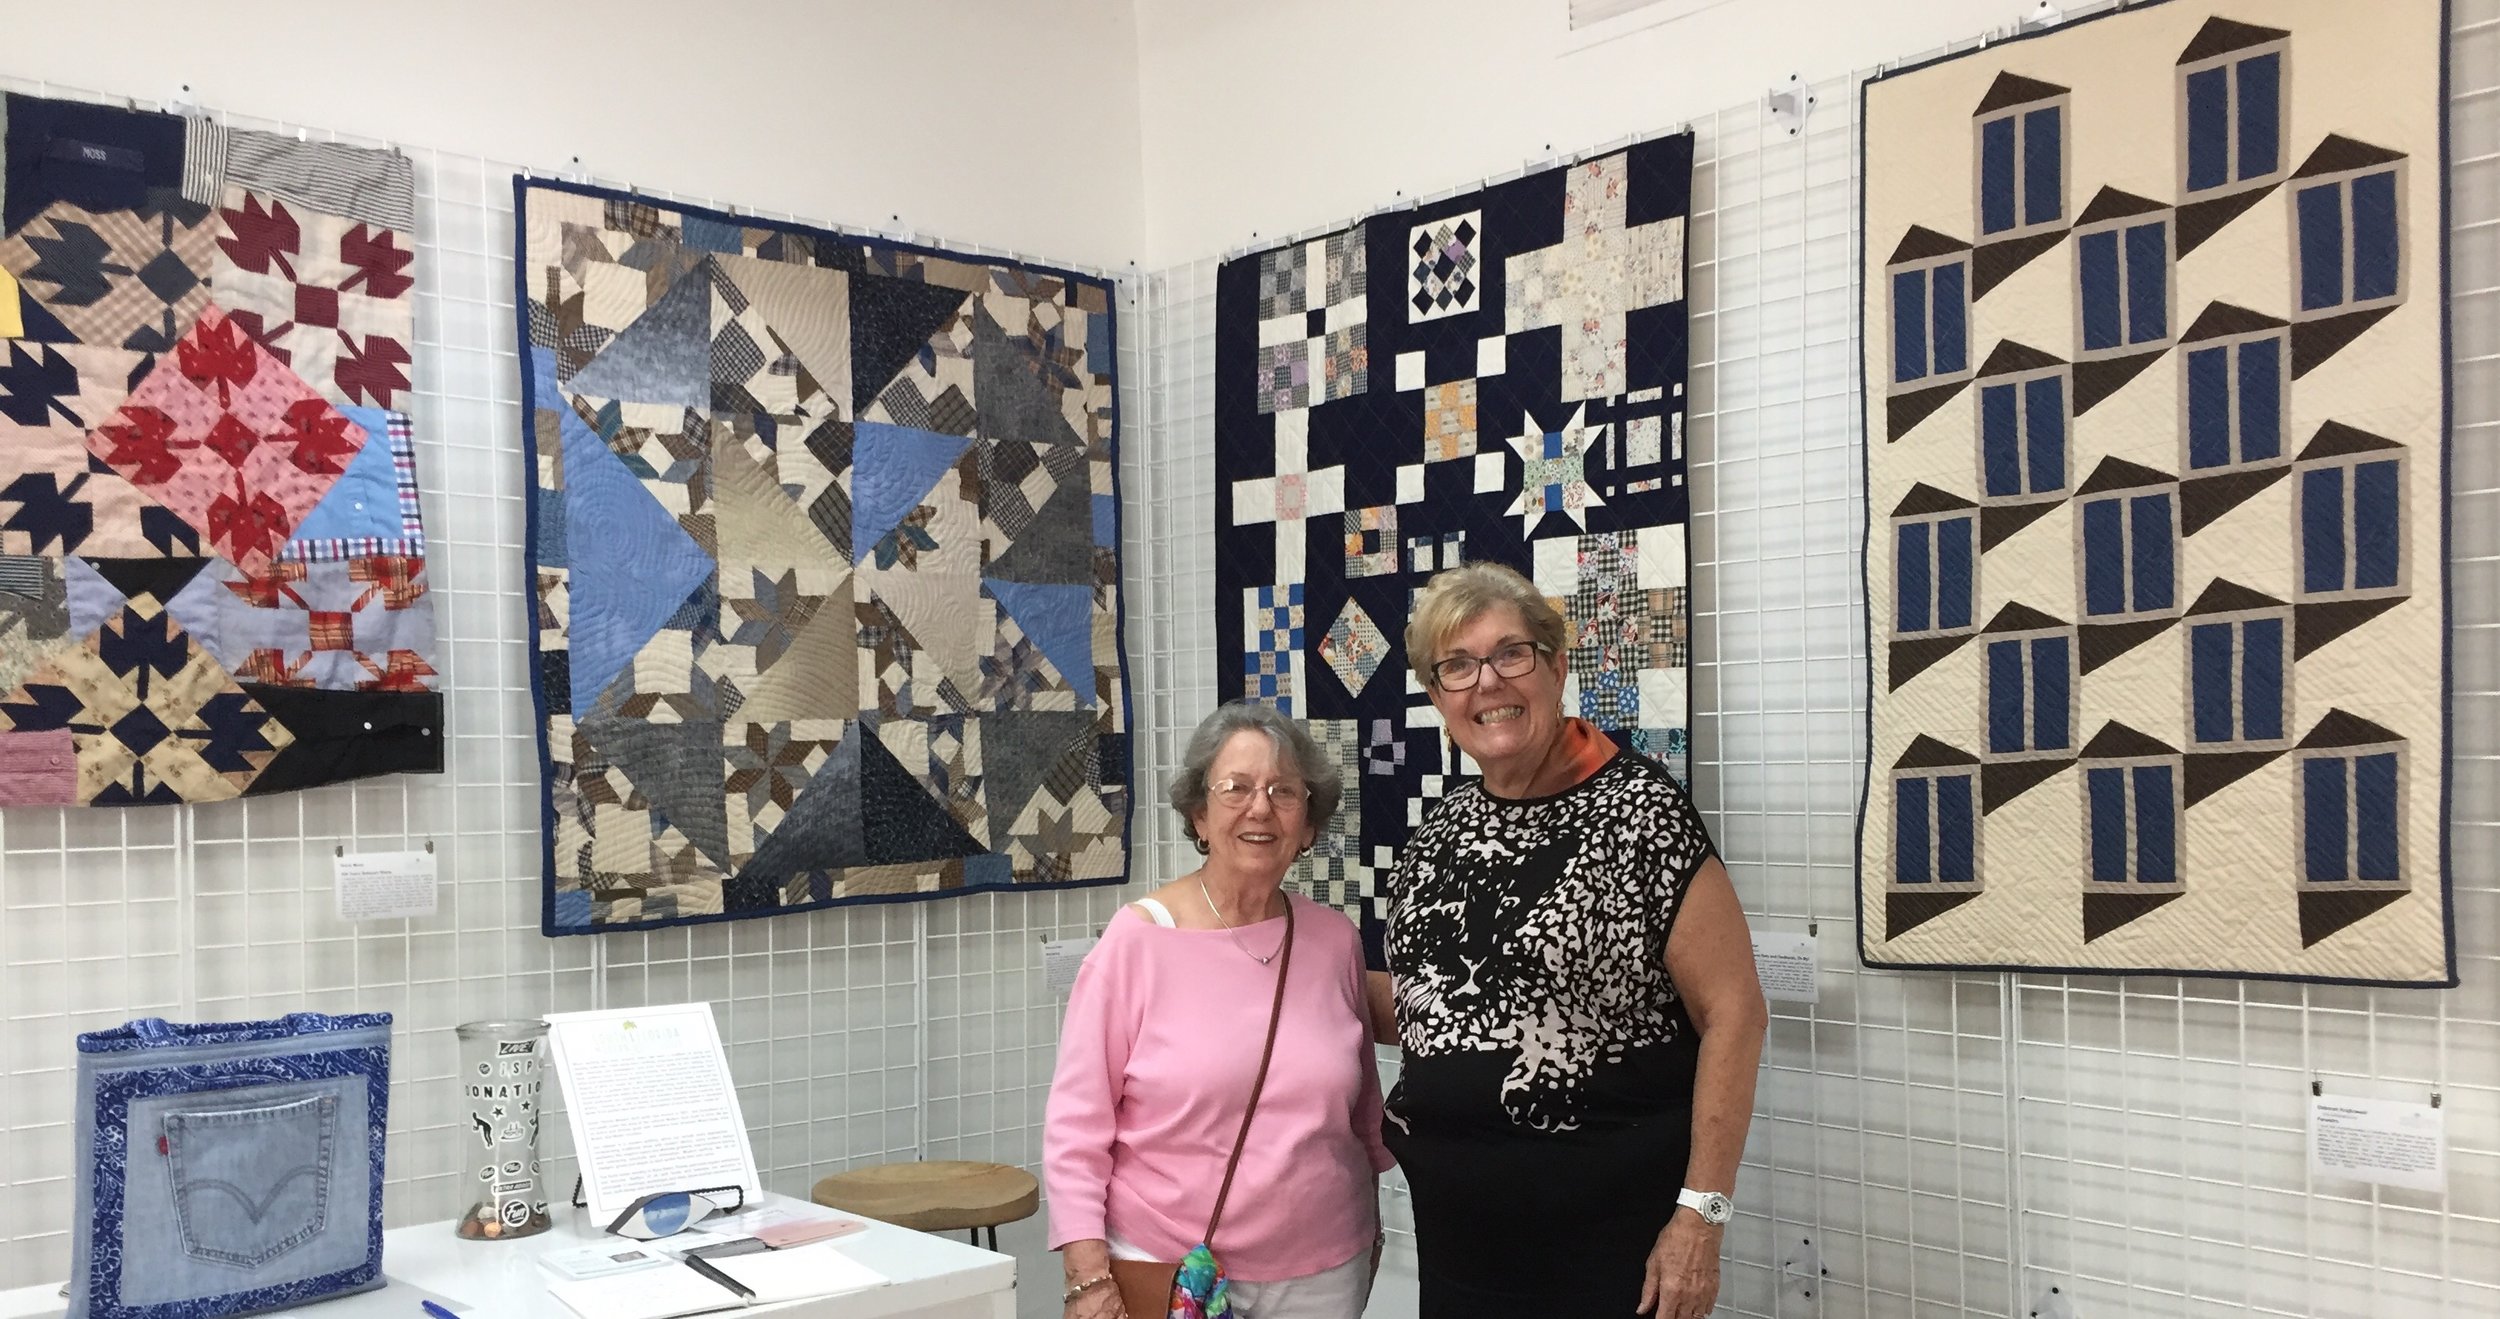  Artist Diane Moss (on right) and Guest   100 Years Between Shirts  by Diane Moss   Wondering  by Patricia Auten   Nine Patch and Navy and Feedsacks, Oh My!  by Nicole Kaplan   Fenestra  by Deborah Krajkowski   Levi Pockets Tote  by Pam Chamberlin 